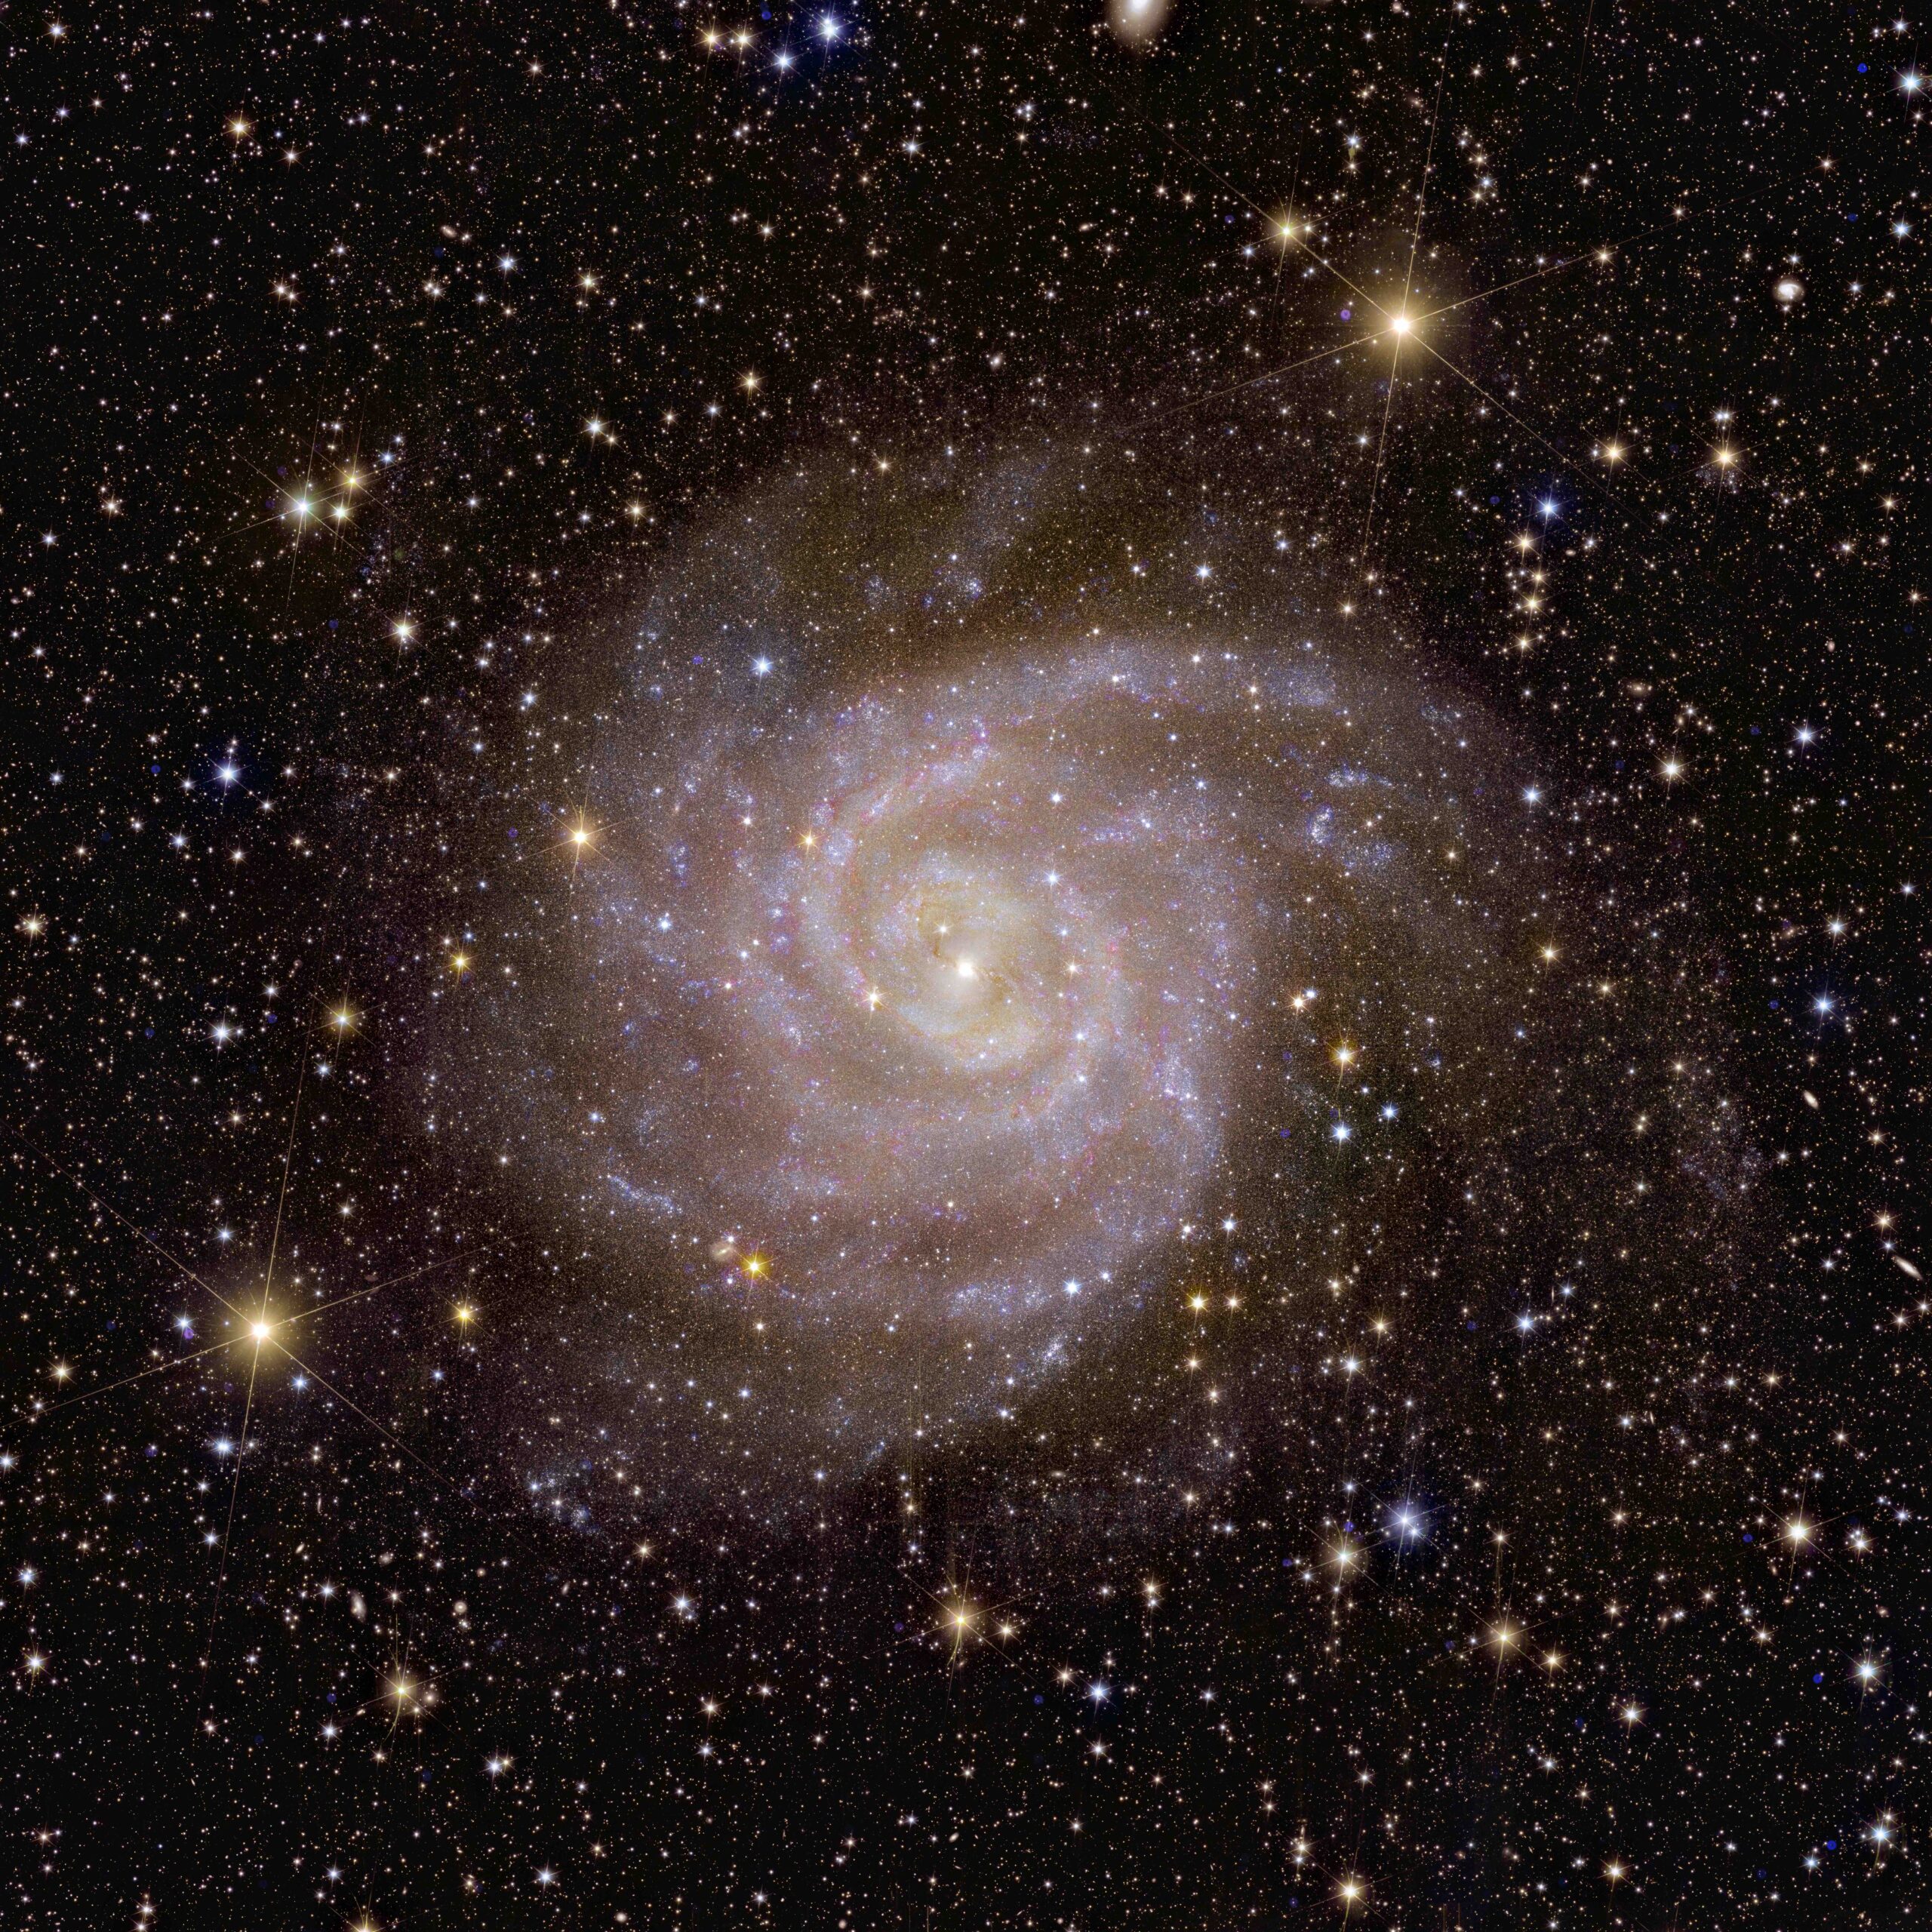 false-color infrared view of the spiral galaxy ic 342 from the Euclid space telescope